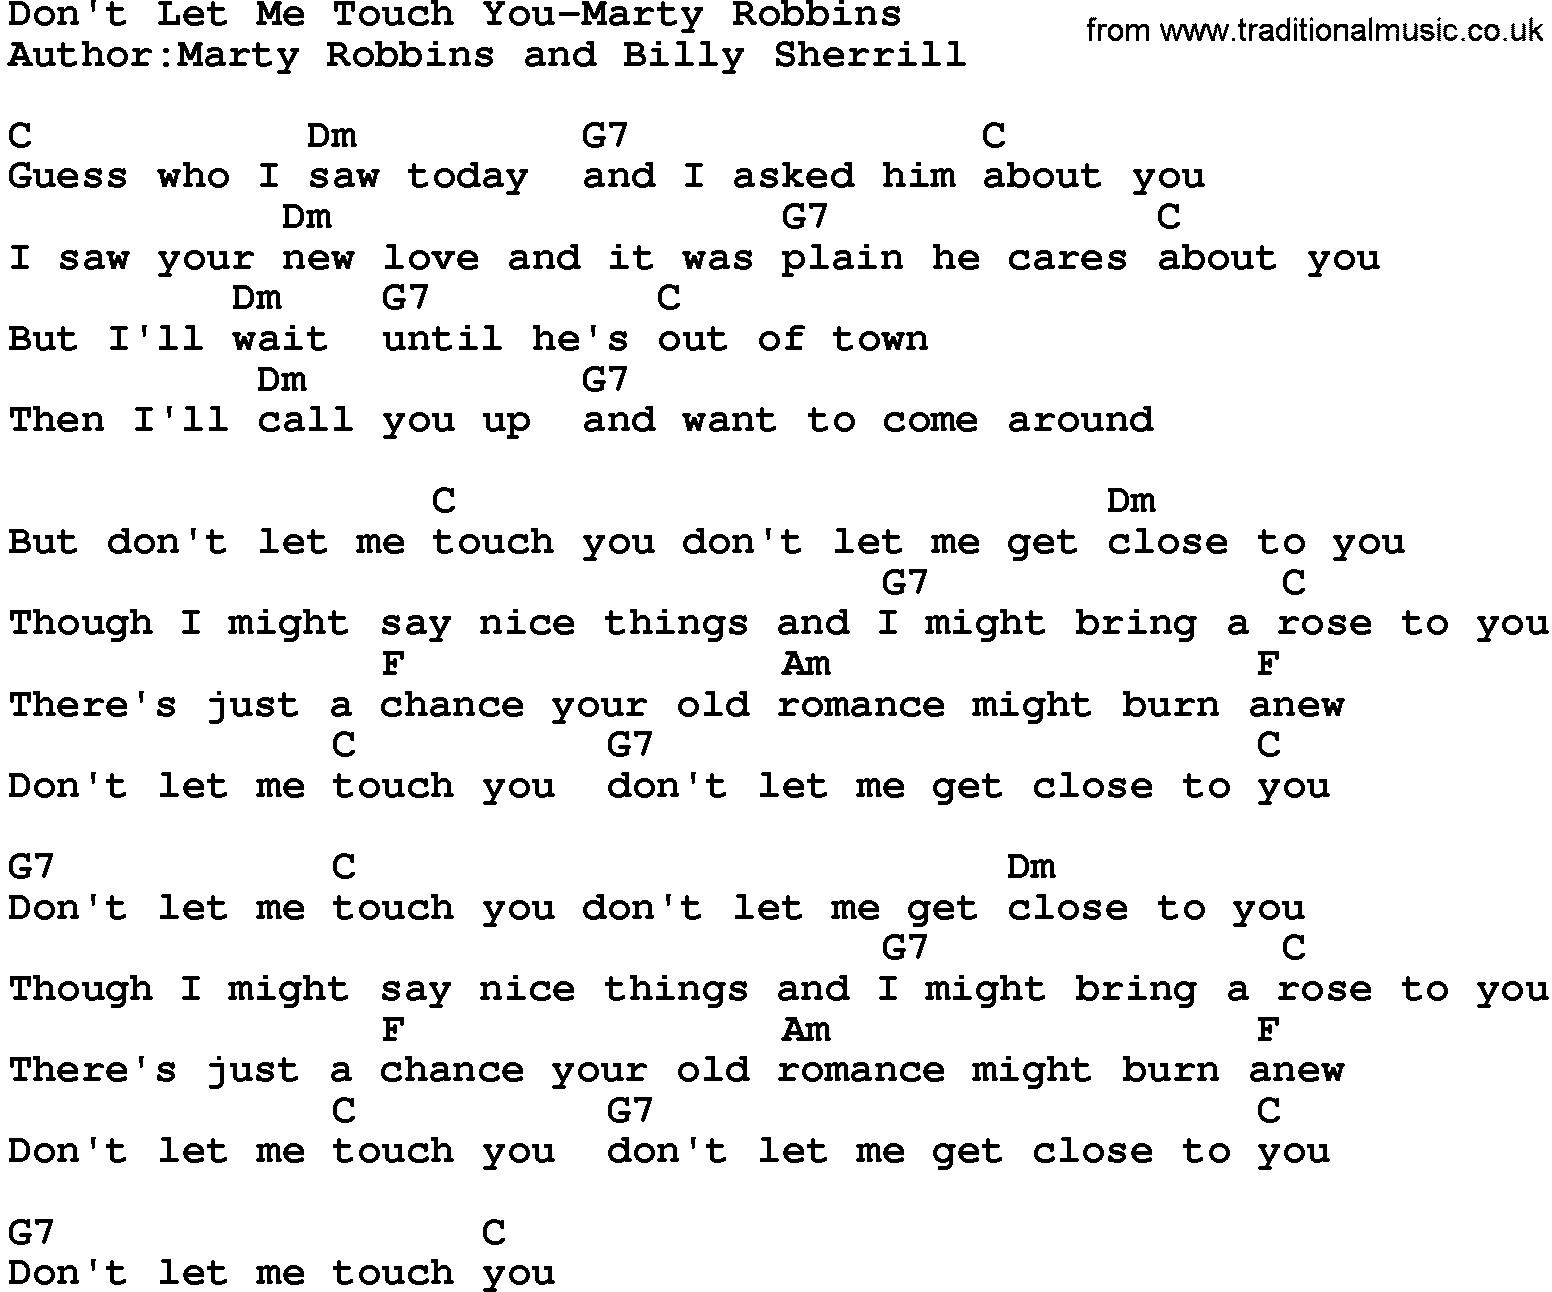 Country music song: Don't Let Me Touch You-Marty Robbins lyrics and chords